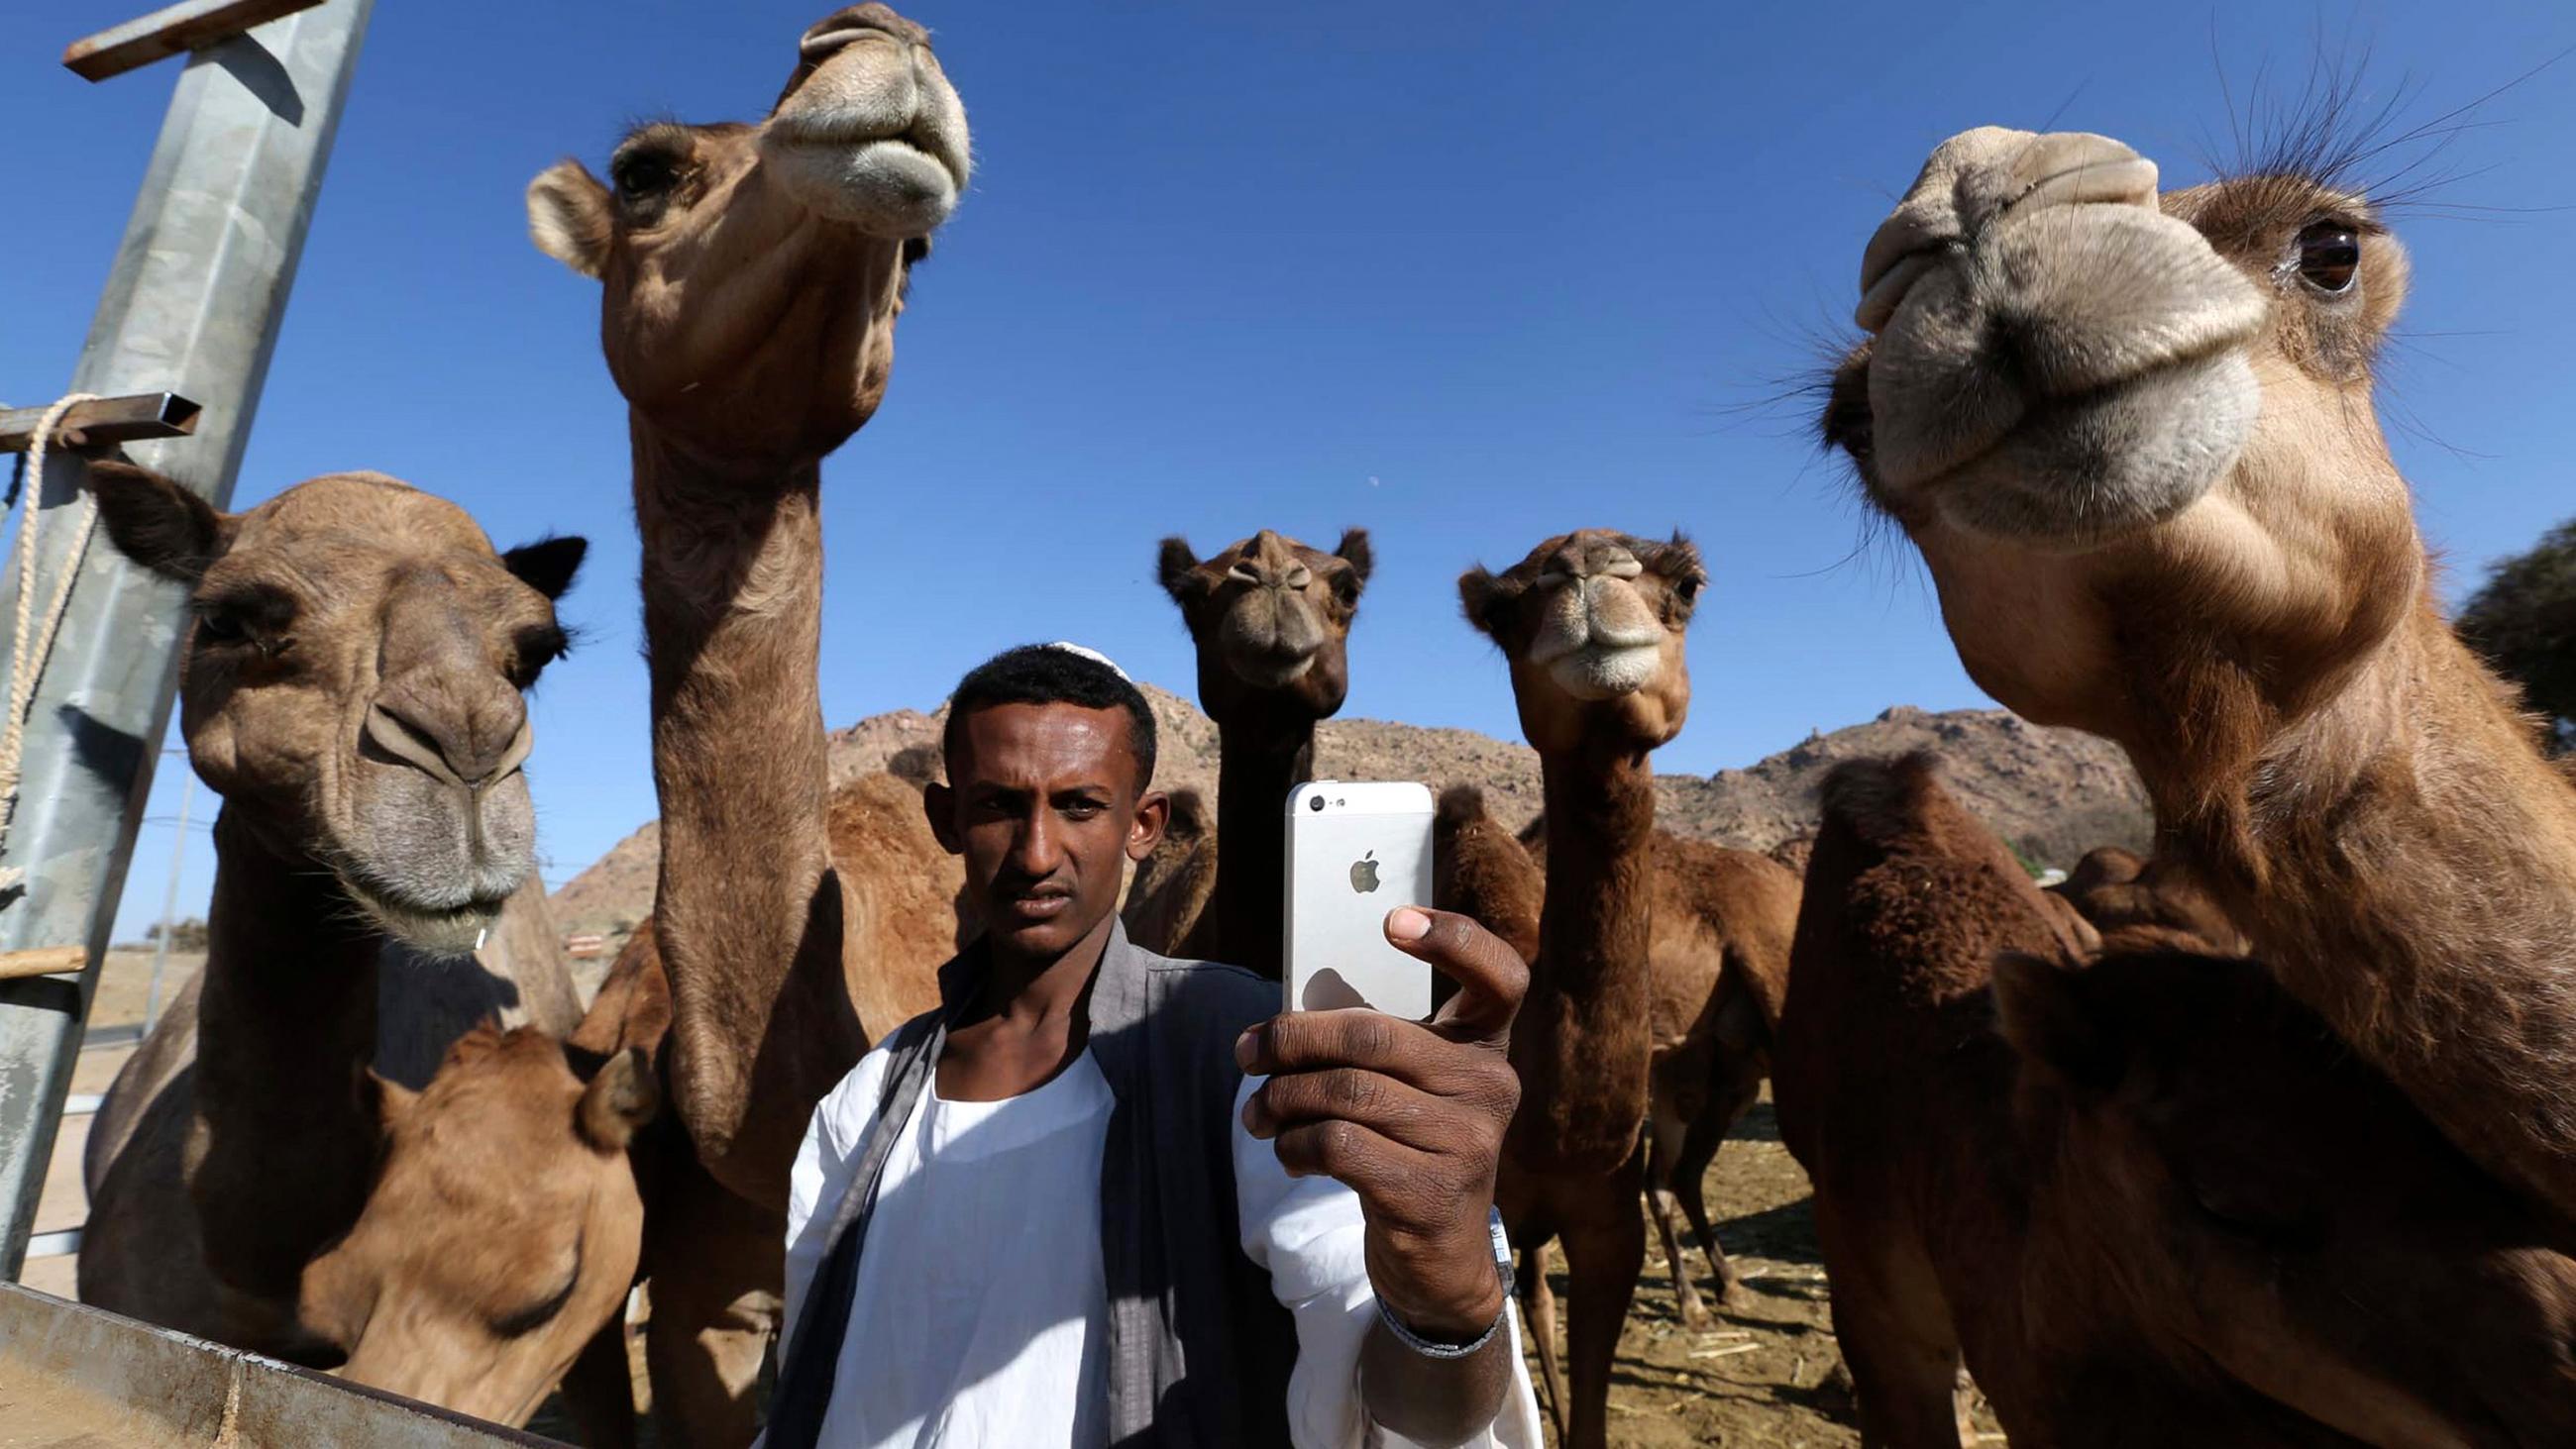 The photo shows a man taking a "selfie" with camels. 